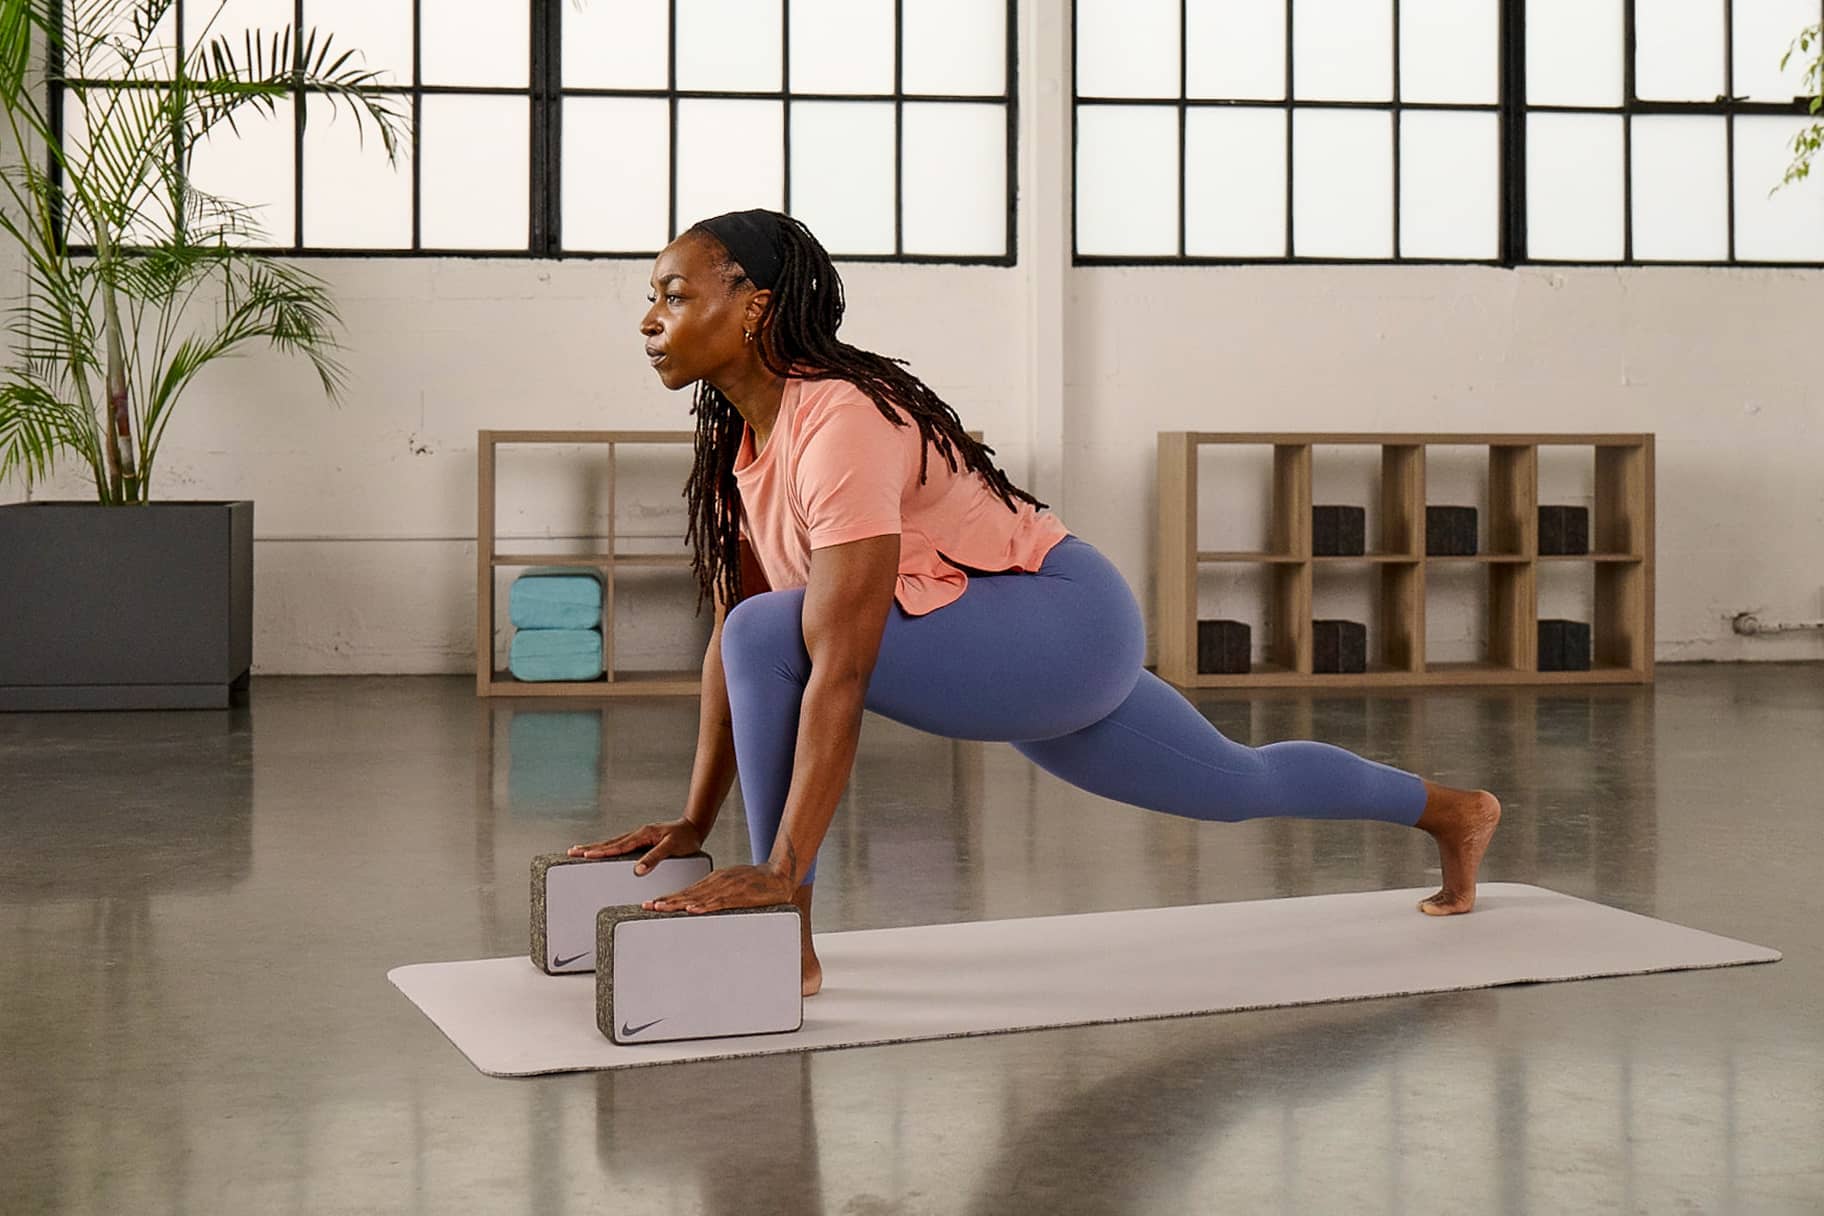 How to Use Yoga Blocks: 5 Poses to Try. Nike HR